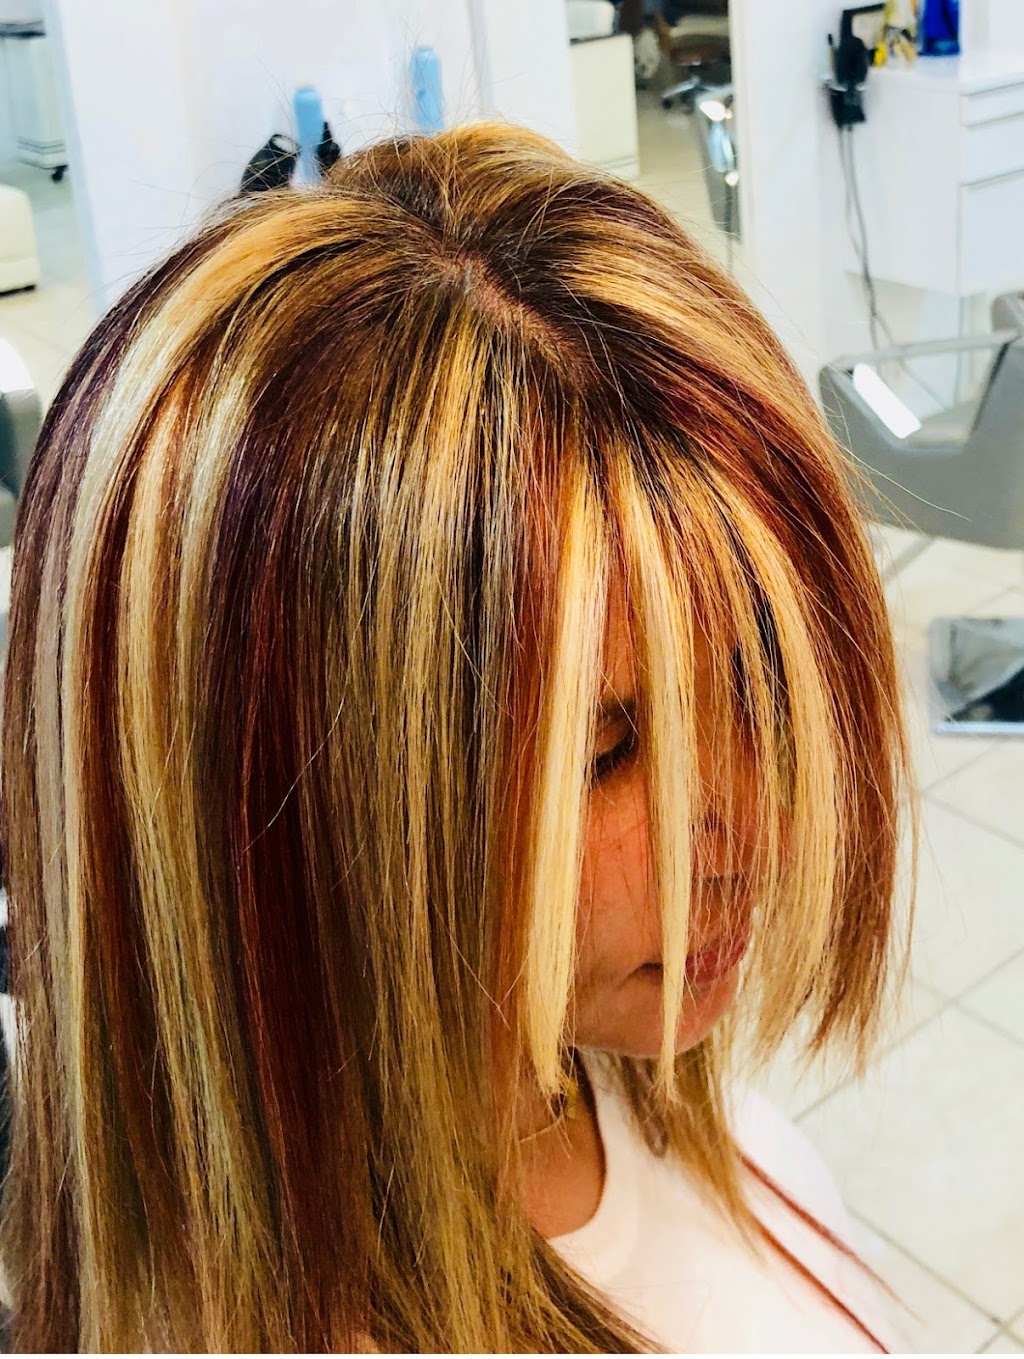 Glamour hair by jaki | 2915 Stirling Rd, Fort Lauderdale, FL 33312 | Phone: (954) 966-3636